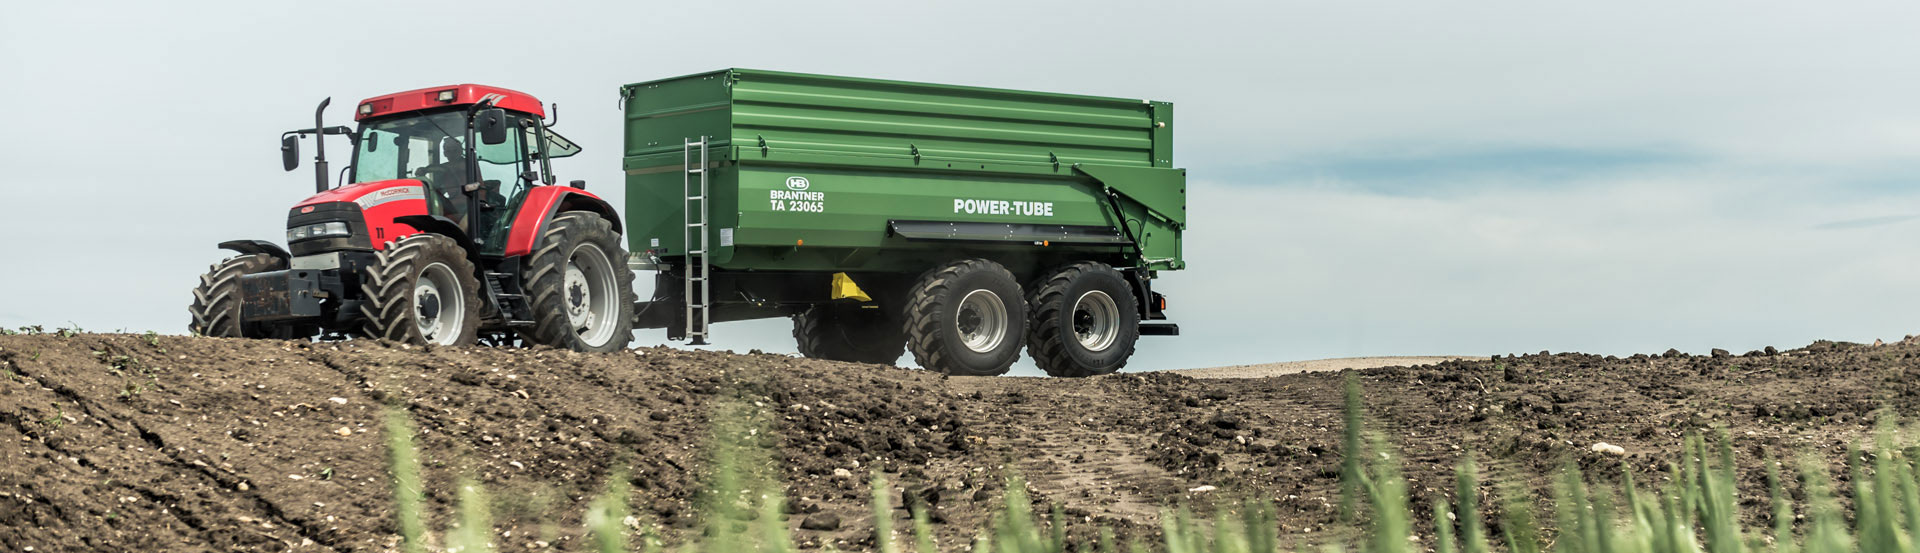 The Brantner TA22062/2 XPT Brantner tandem-cross-dumper from Brantner is the flexible tool for earth movements, sand and gravel transport, but also for silage and other applications.